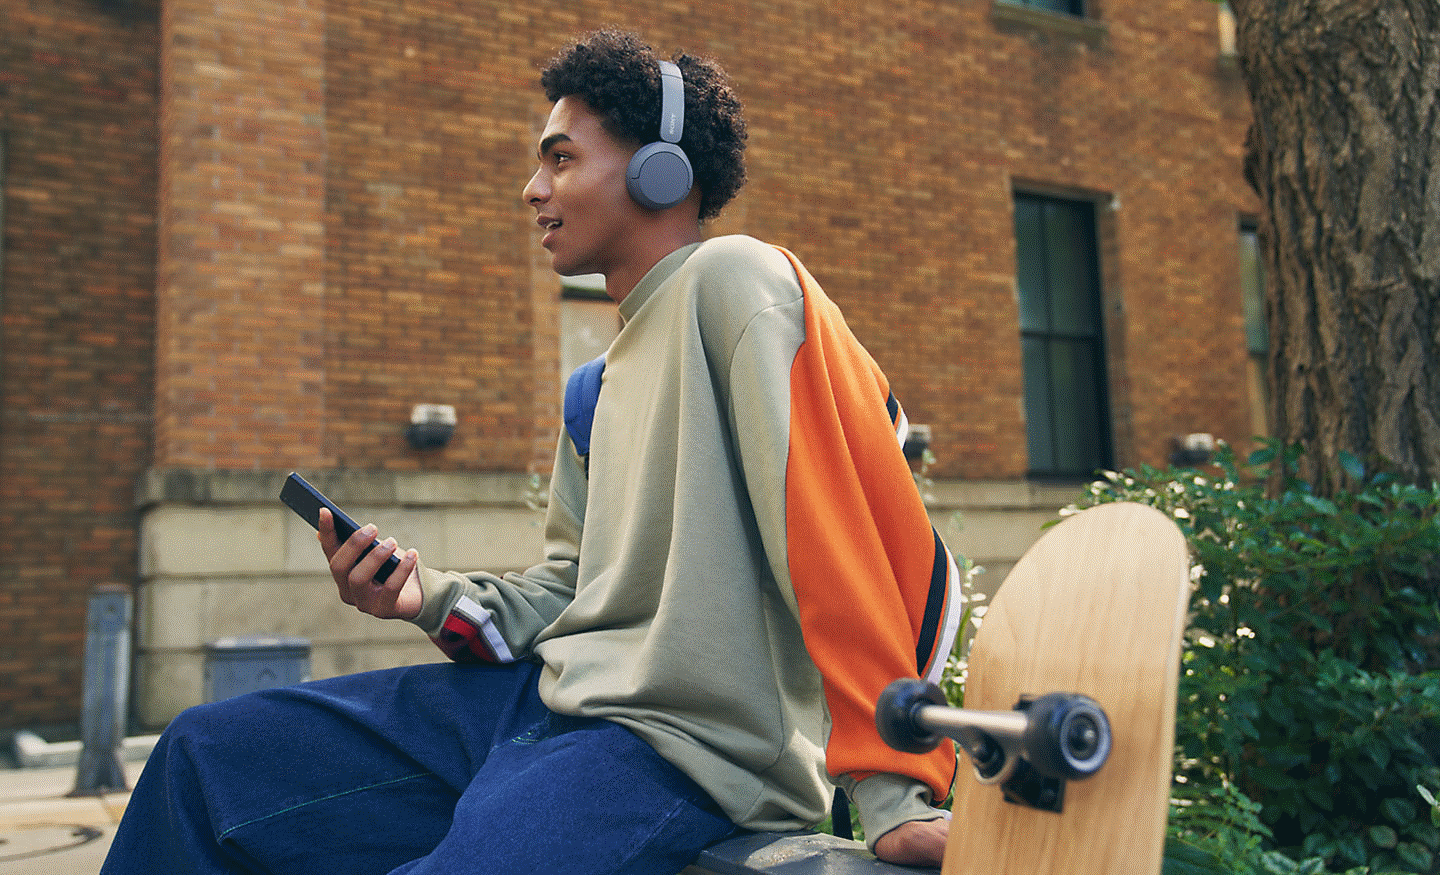 Image of a man sitting on a wall wearing Sony WH-CH520 headphones and holding a mobile phone with a skateboard in the foreground